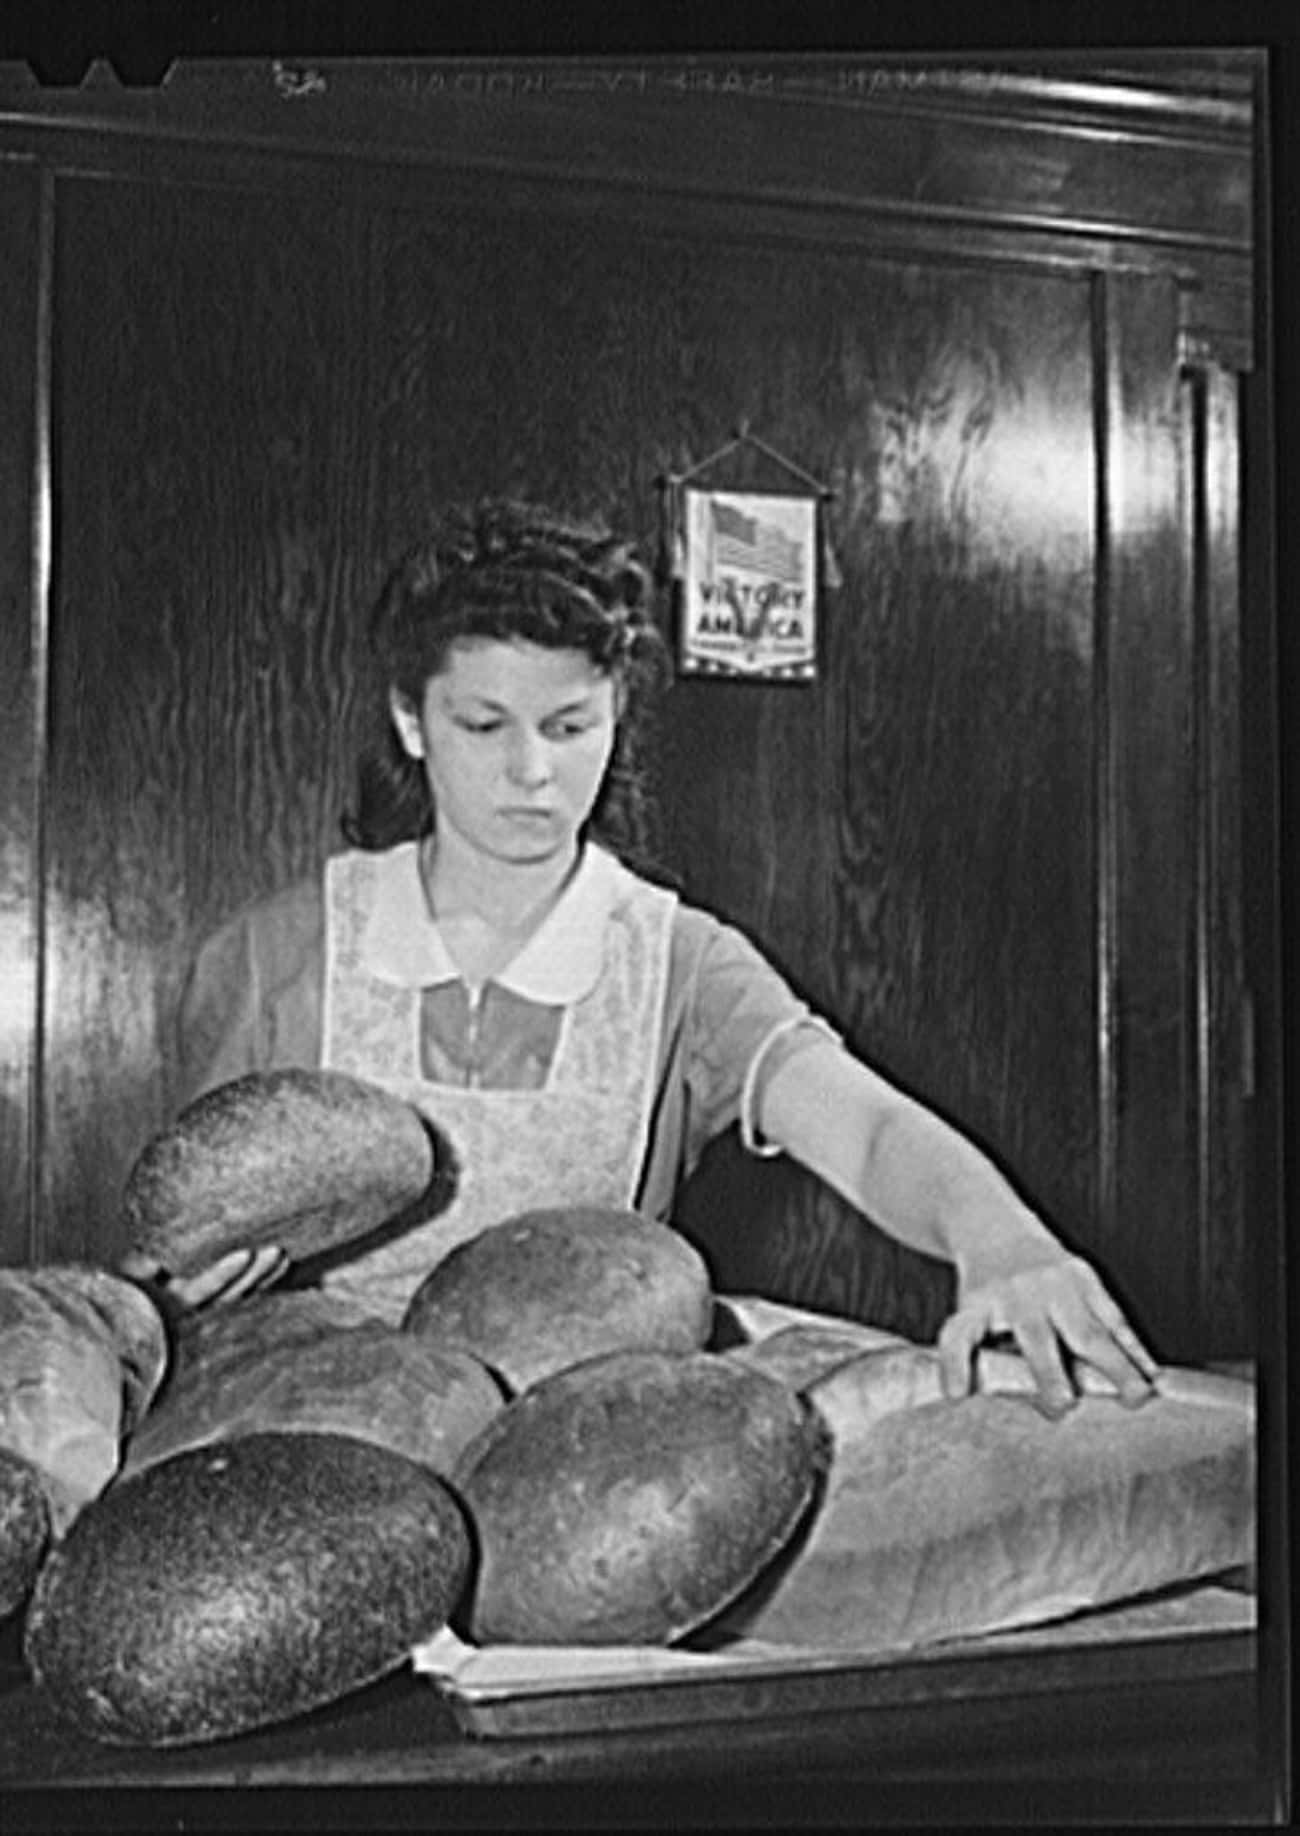 Local Neighborhood Bakeries Made Dark Bread And Were Usually Owned By Immigrants, Which Led To Some Strange Bread Xenophobia